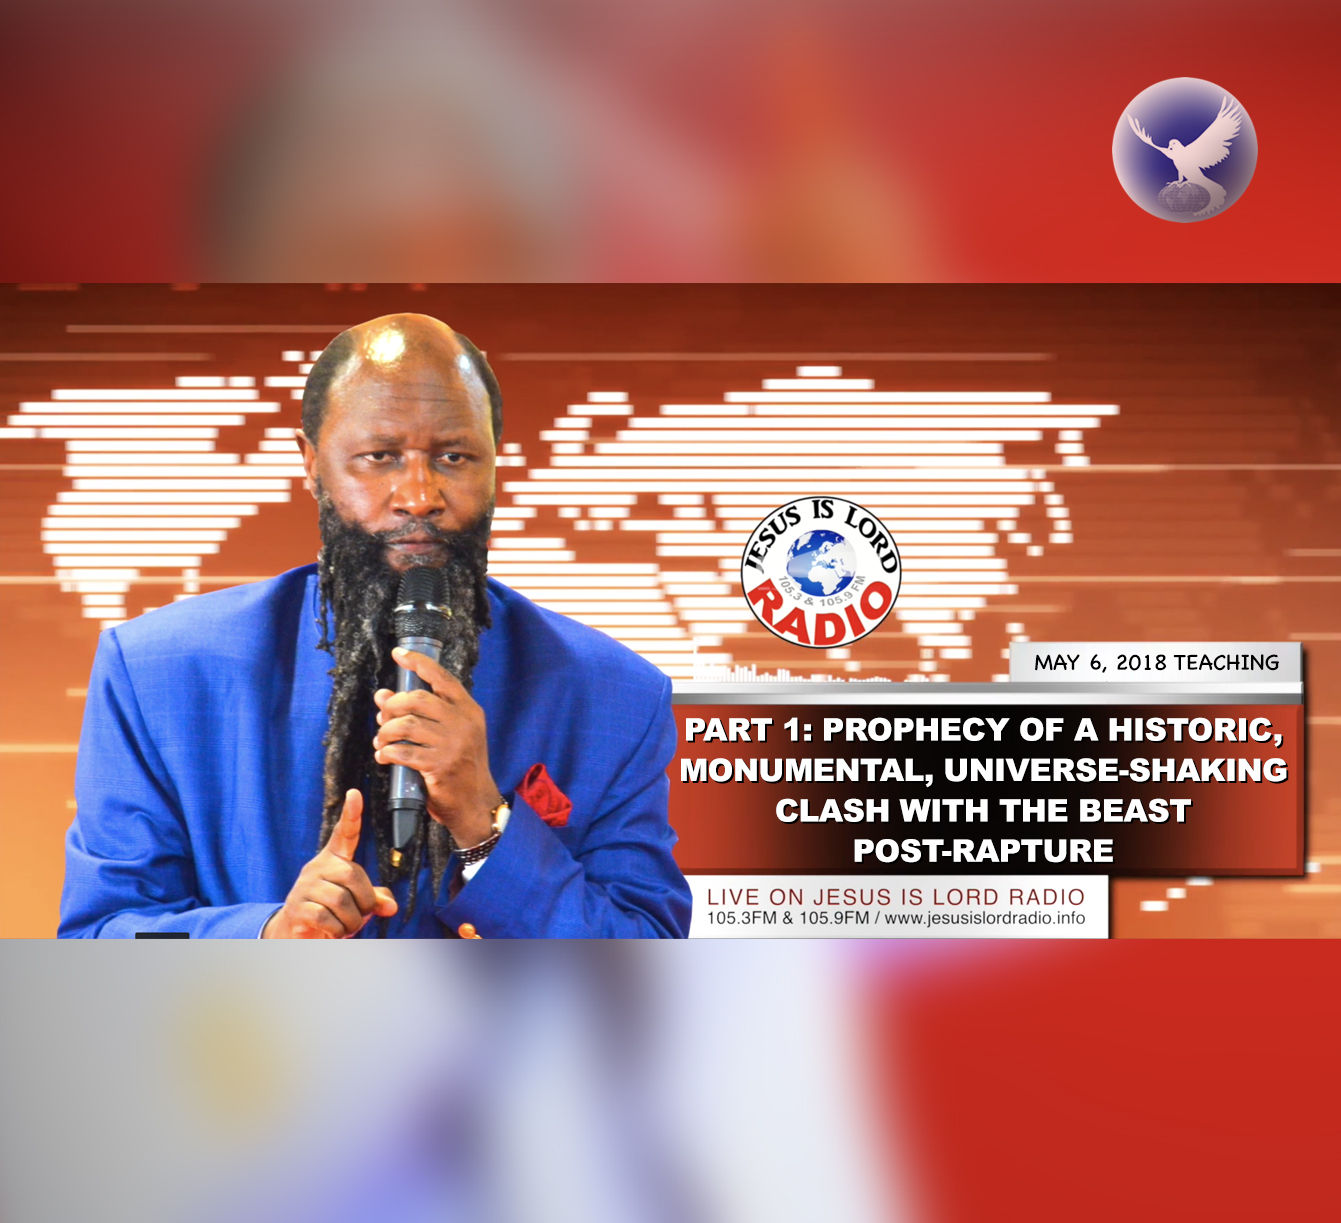 EPISODE 188 - Part 1: PROPHECY OF A HISTORIC, MONUMENTAL, UNIVERSE-SHAKING CLASH WITH THE BEAST POST-RAPTURE (6May2018) - PROPHET DR. OWUOR